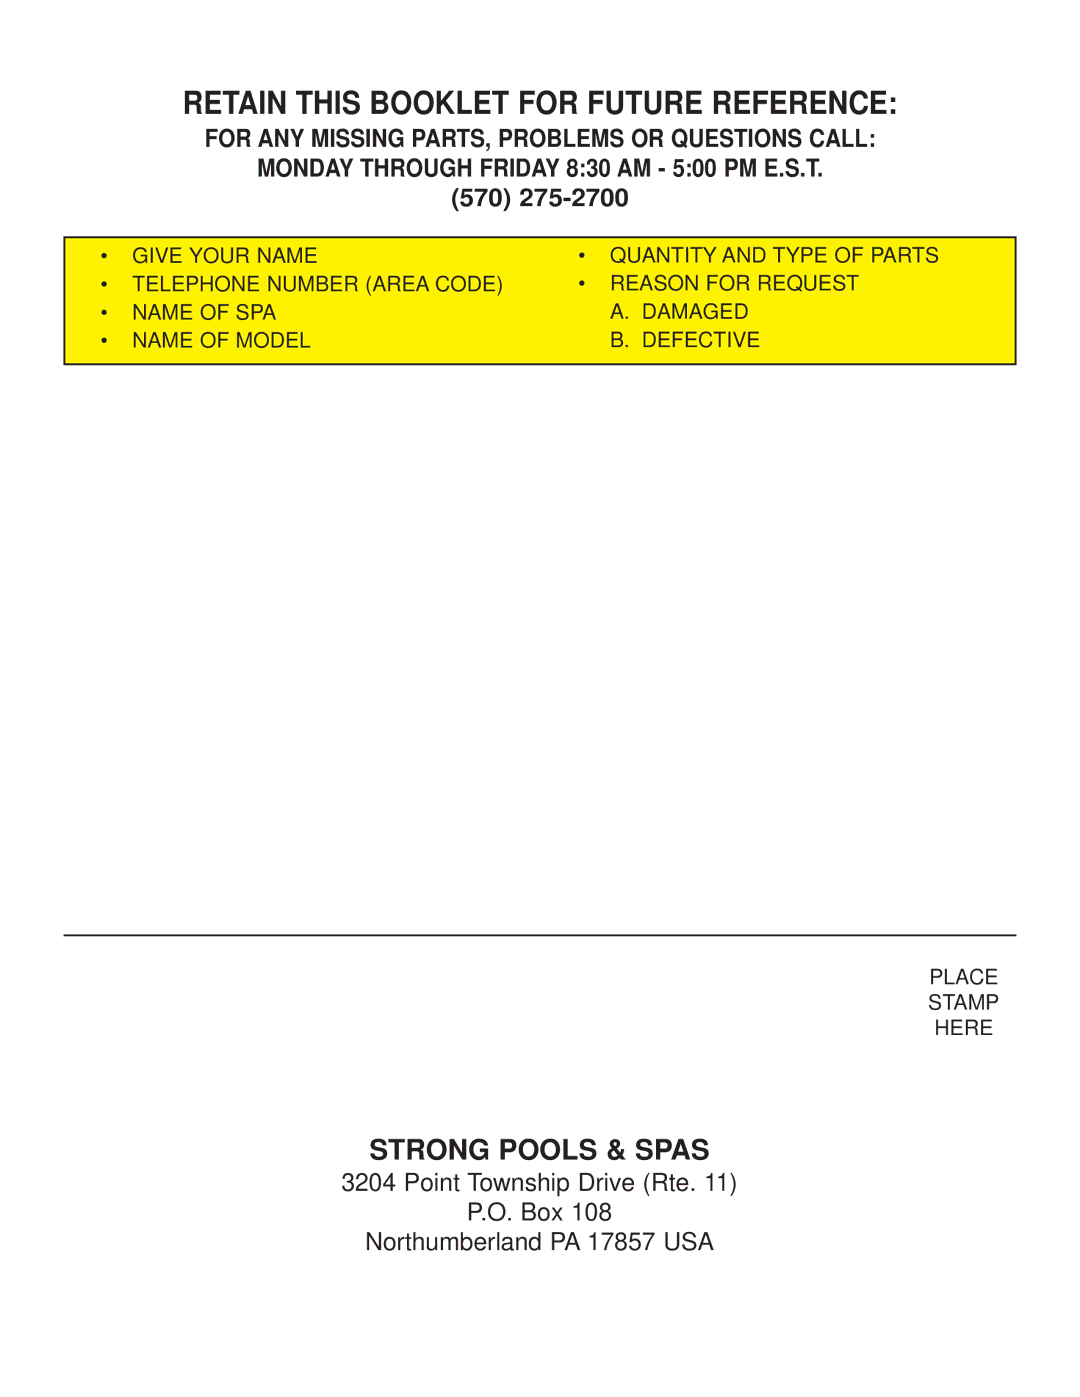 Strong Pools and Spas Monaco owner manual Retain this Booklet for Future Reference 